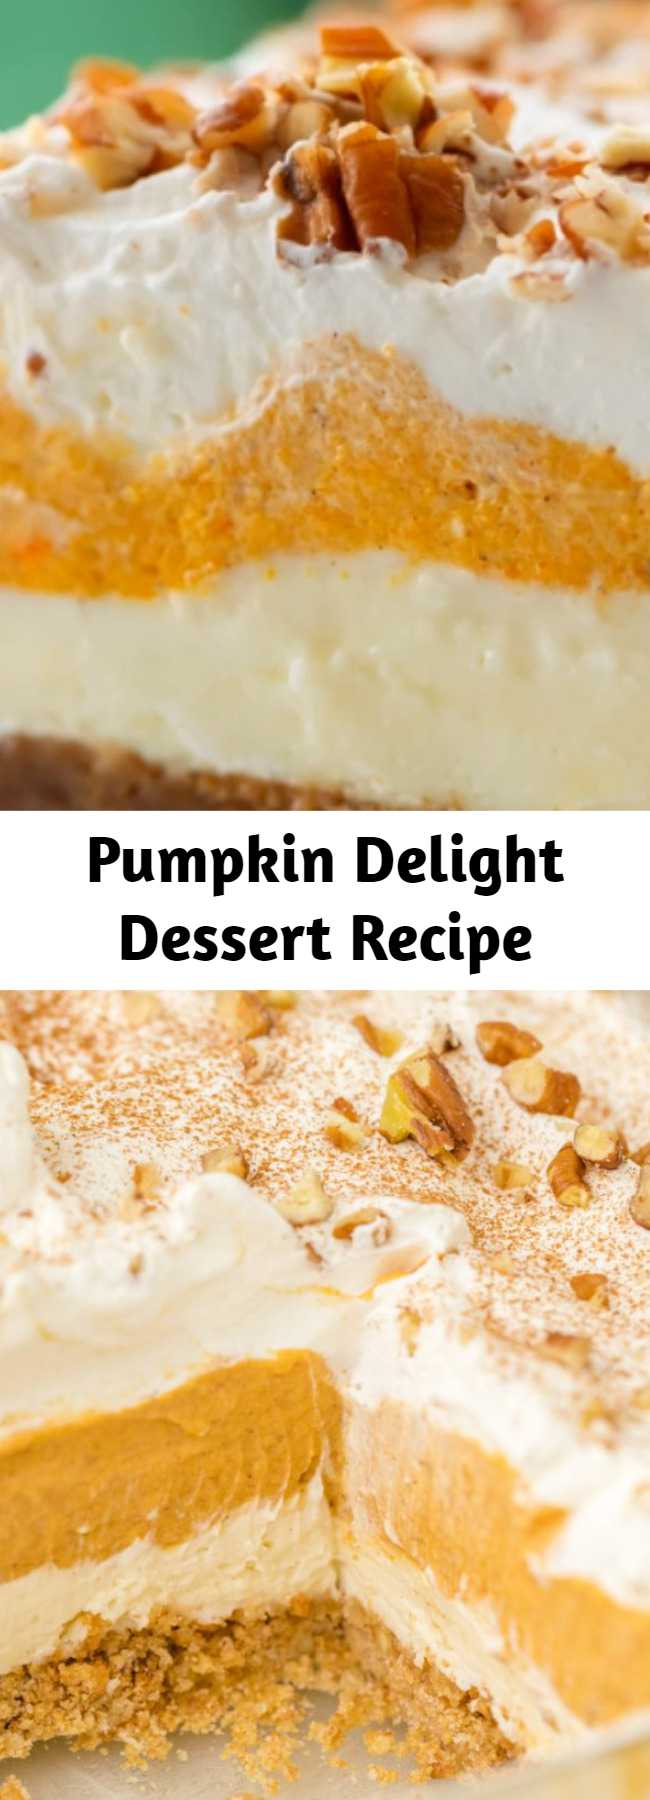 Pumpkin Delight Dessert Recipe - Instead of classic pumpkin pie this fall (or Thanksgiving!), try this easy pumpkin delight instead! A homemade pecan and graham cracker mix forms a crust that is topped with layers of light and fluffy filling including cream cheese, pudding, and Cool Whip make an irresistible treat.